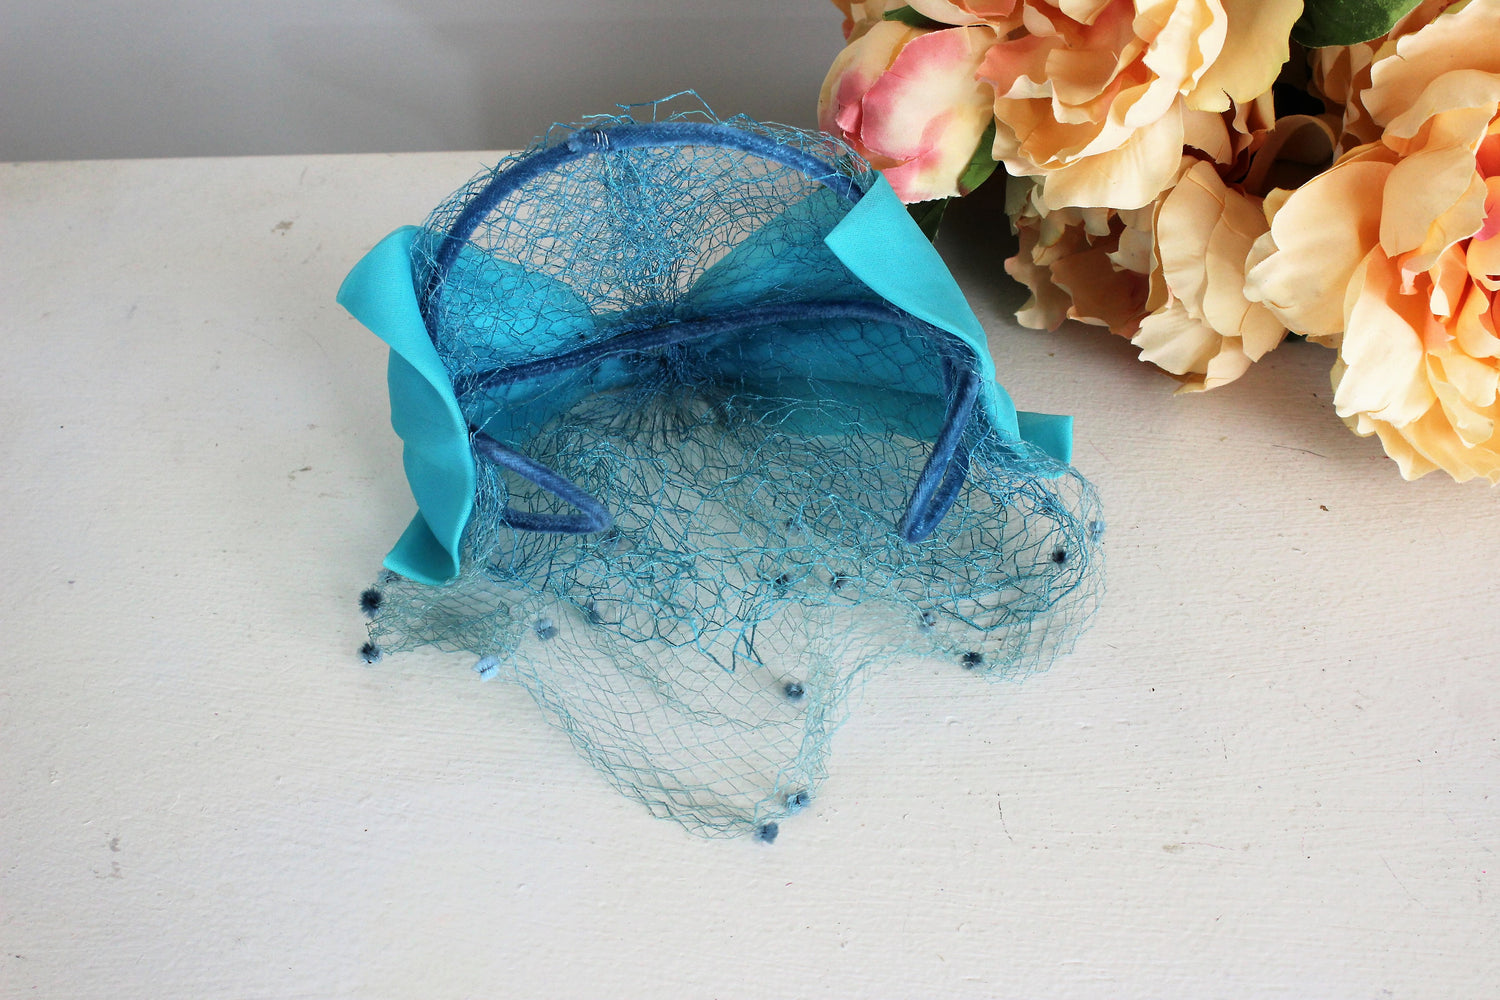 Vintage 1950s Teal Blue Hat with Birdcage Veil and Swiss Dot Tulle Trim